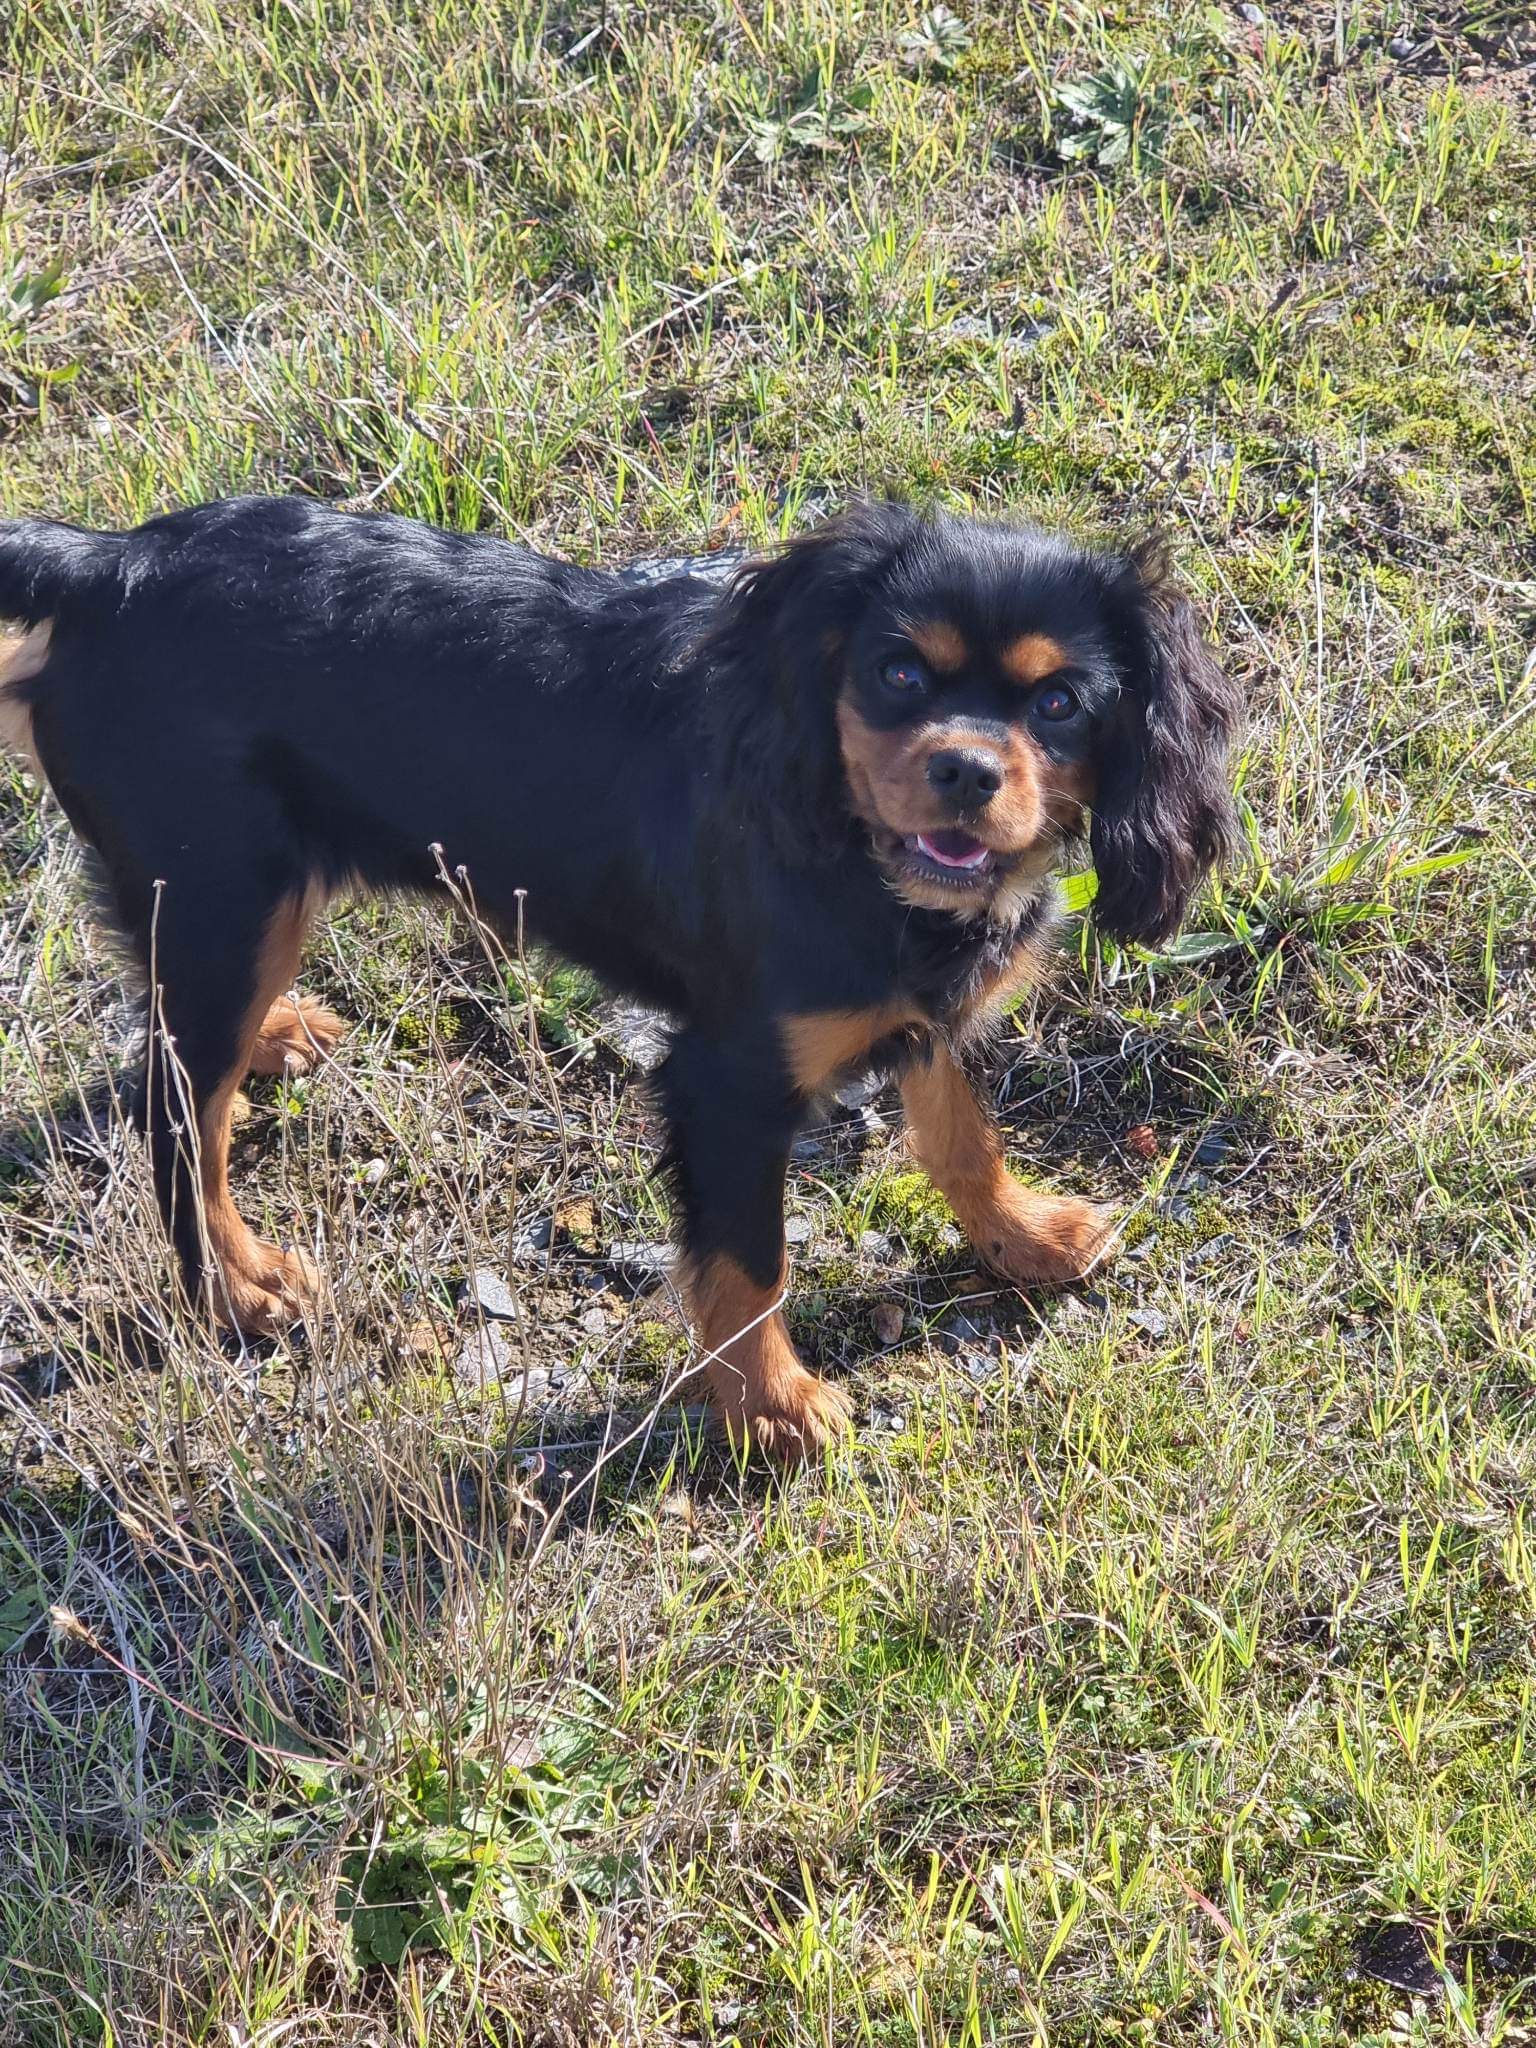 Cavalier puppies for sale